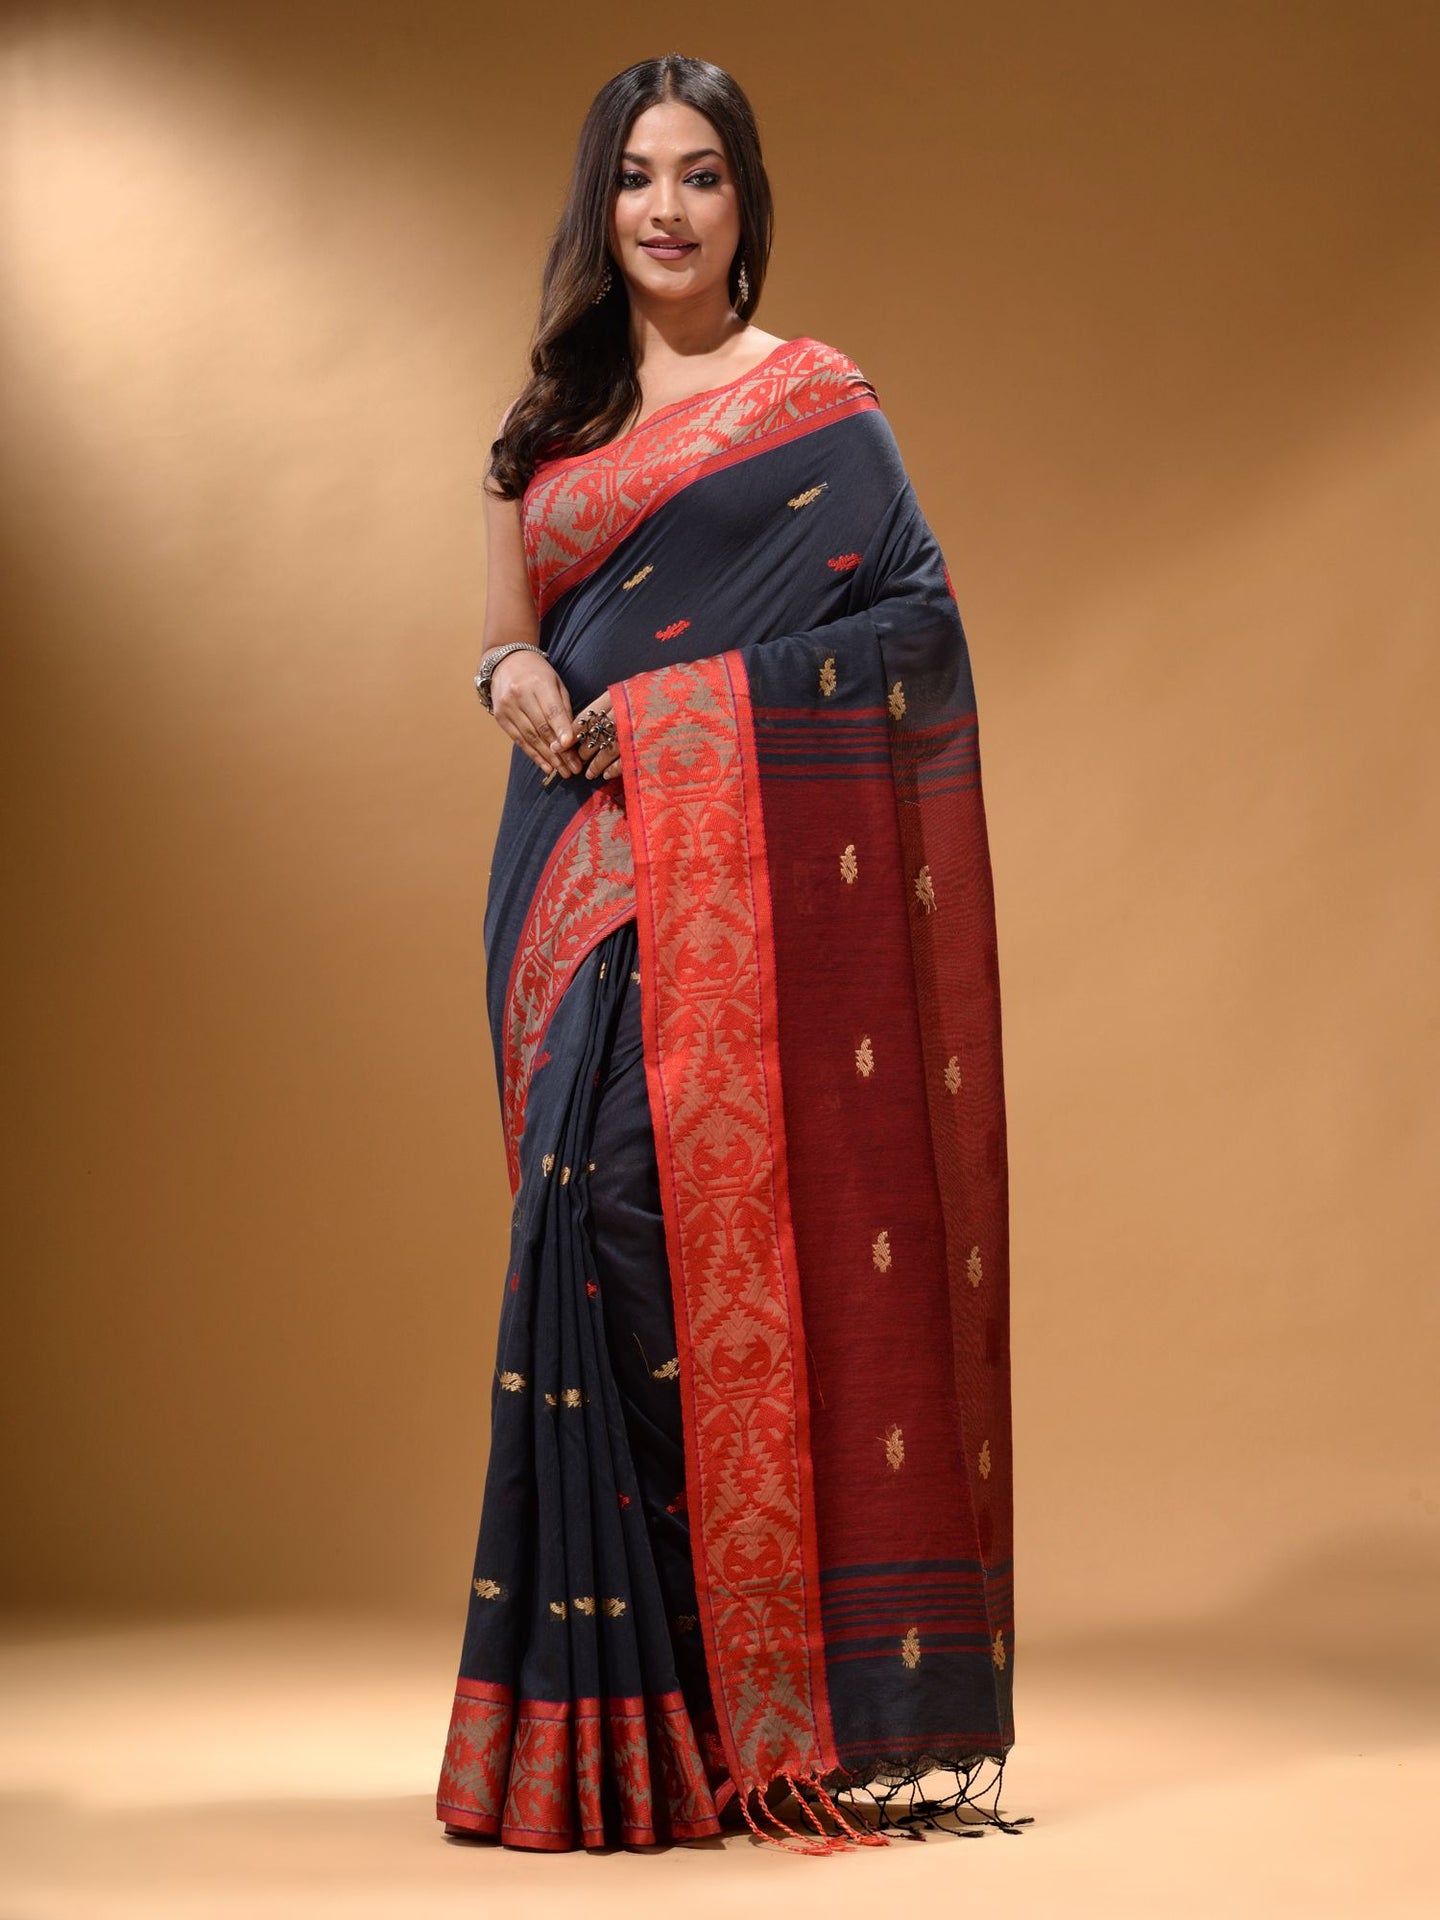 Licorise Black Cotton Handspun Soft Saree With Nakshi Border And Contrast With Red Pallu